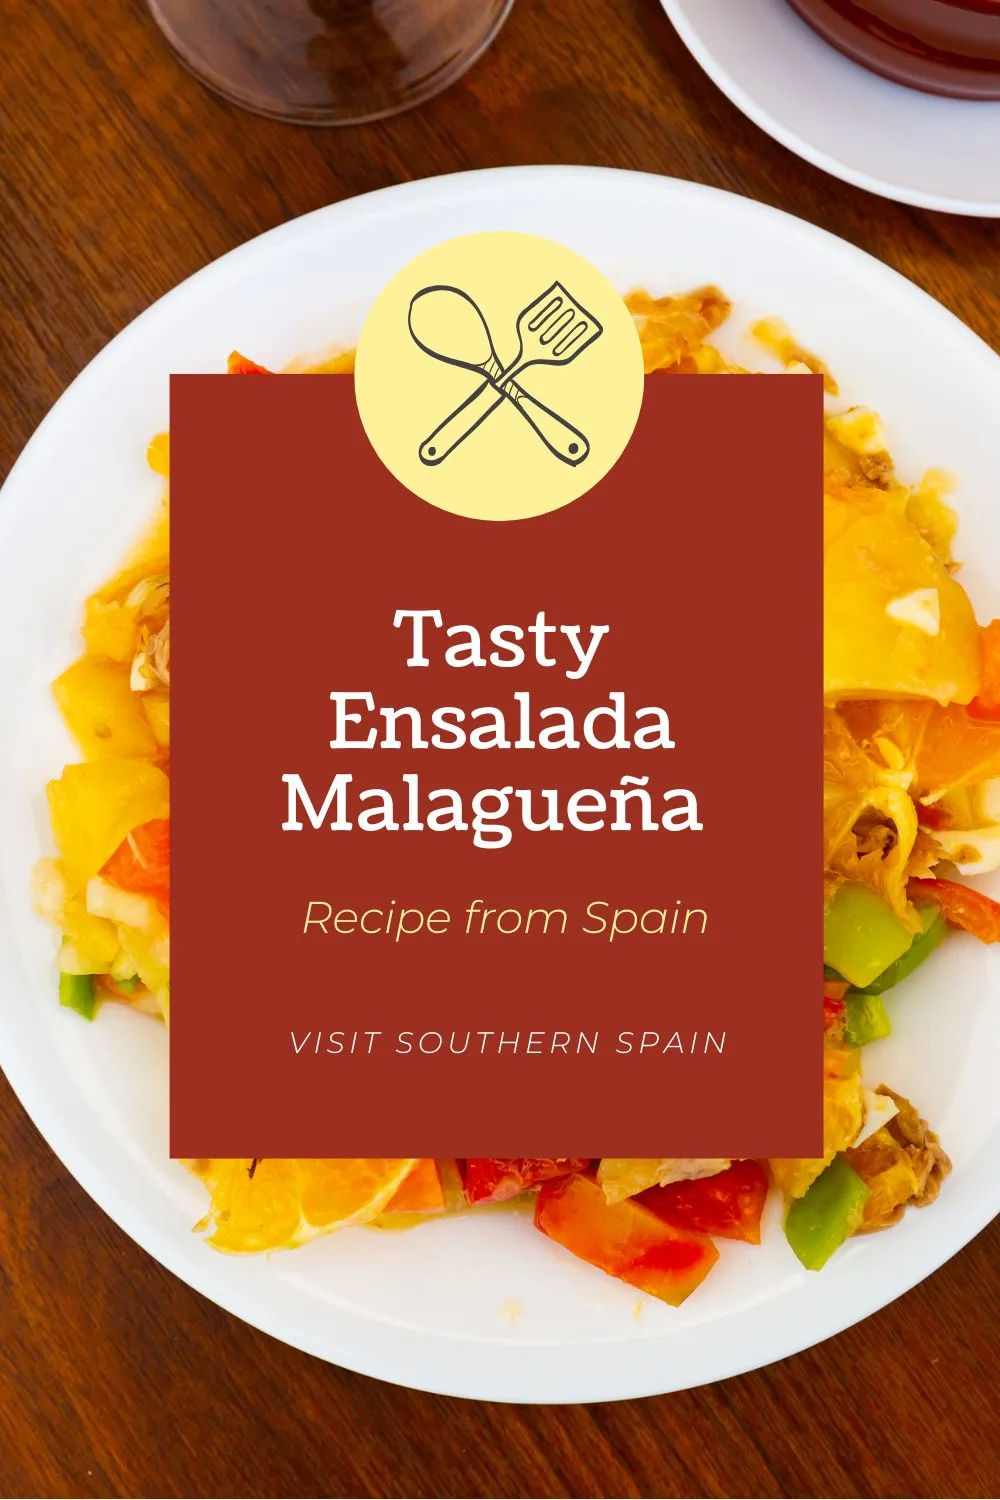 Are you looking for an Easy Ensalada Malagueña Recipe? This is a Malaga-style cod salad that you must try. The Spanish potato salad with cod is easy to make, very refreshing just perfect for hot summer days, and it'll offer the nutrition you need. The Ensalada Malagueña de bacalao is a well-known salad, very much enjoyed by the Spaniards because it has a unique flavor thanks to the combination of ingredients - orange, fish, and potatoes. #ensaladamalagueña #malagasalad #spanishsalad #codsalad